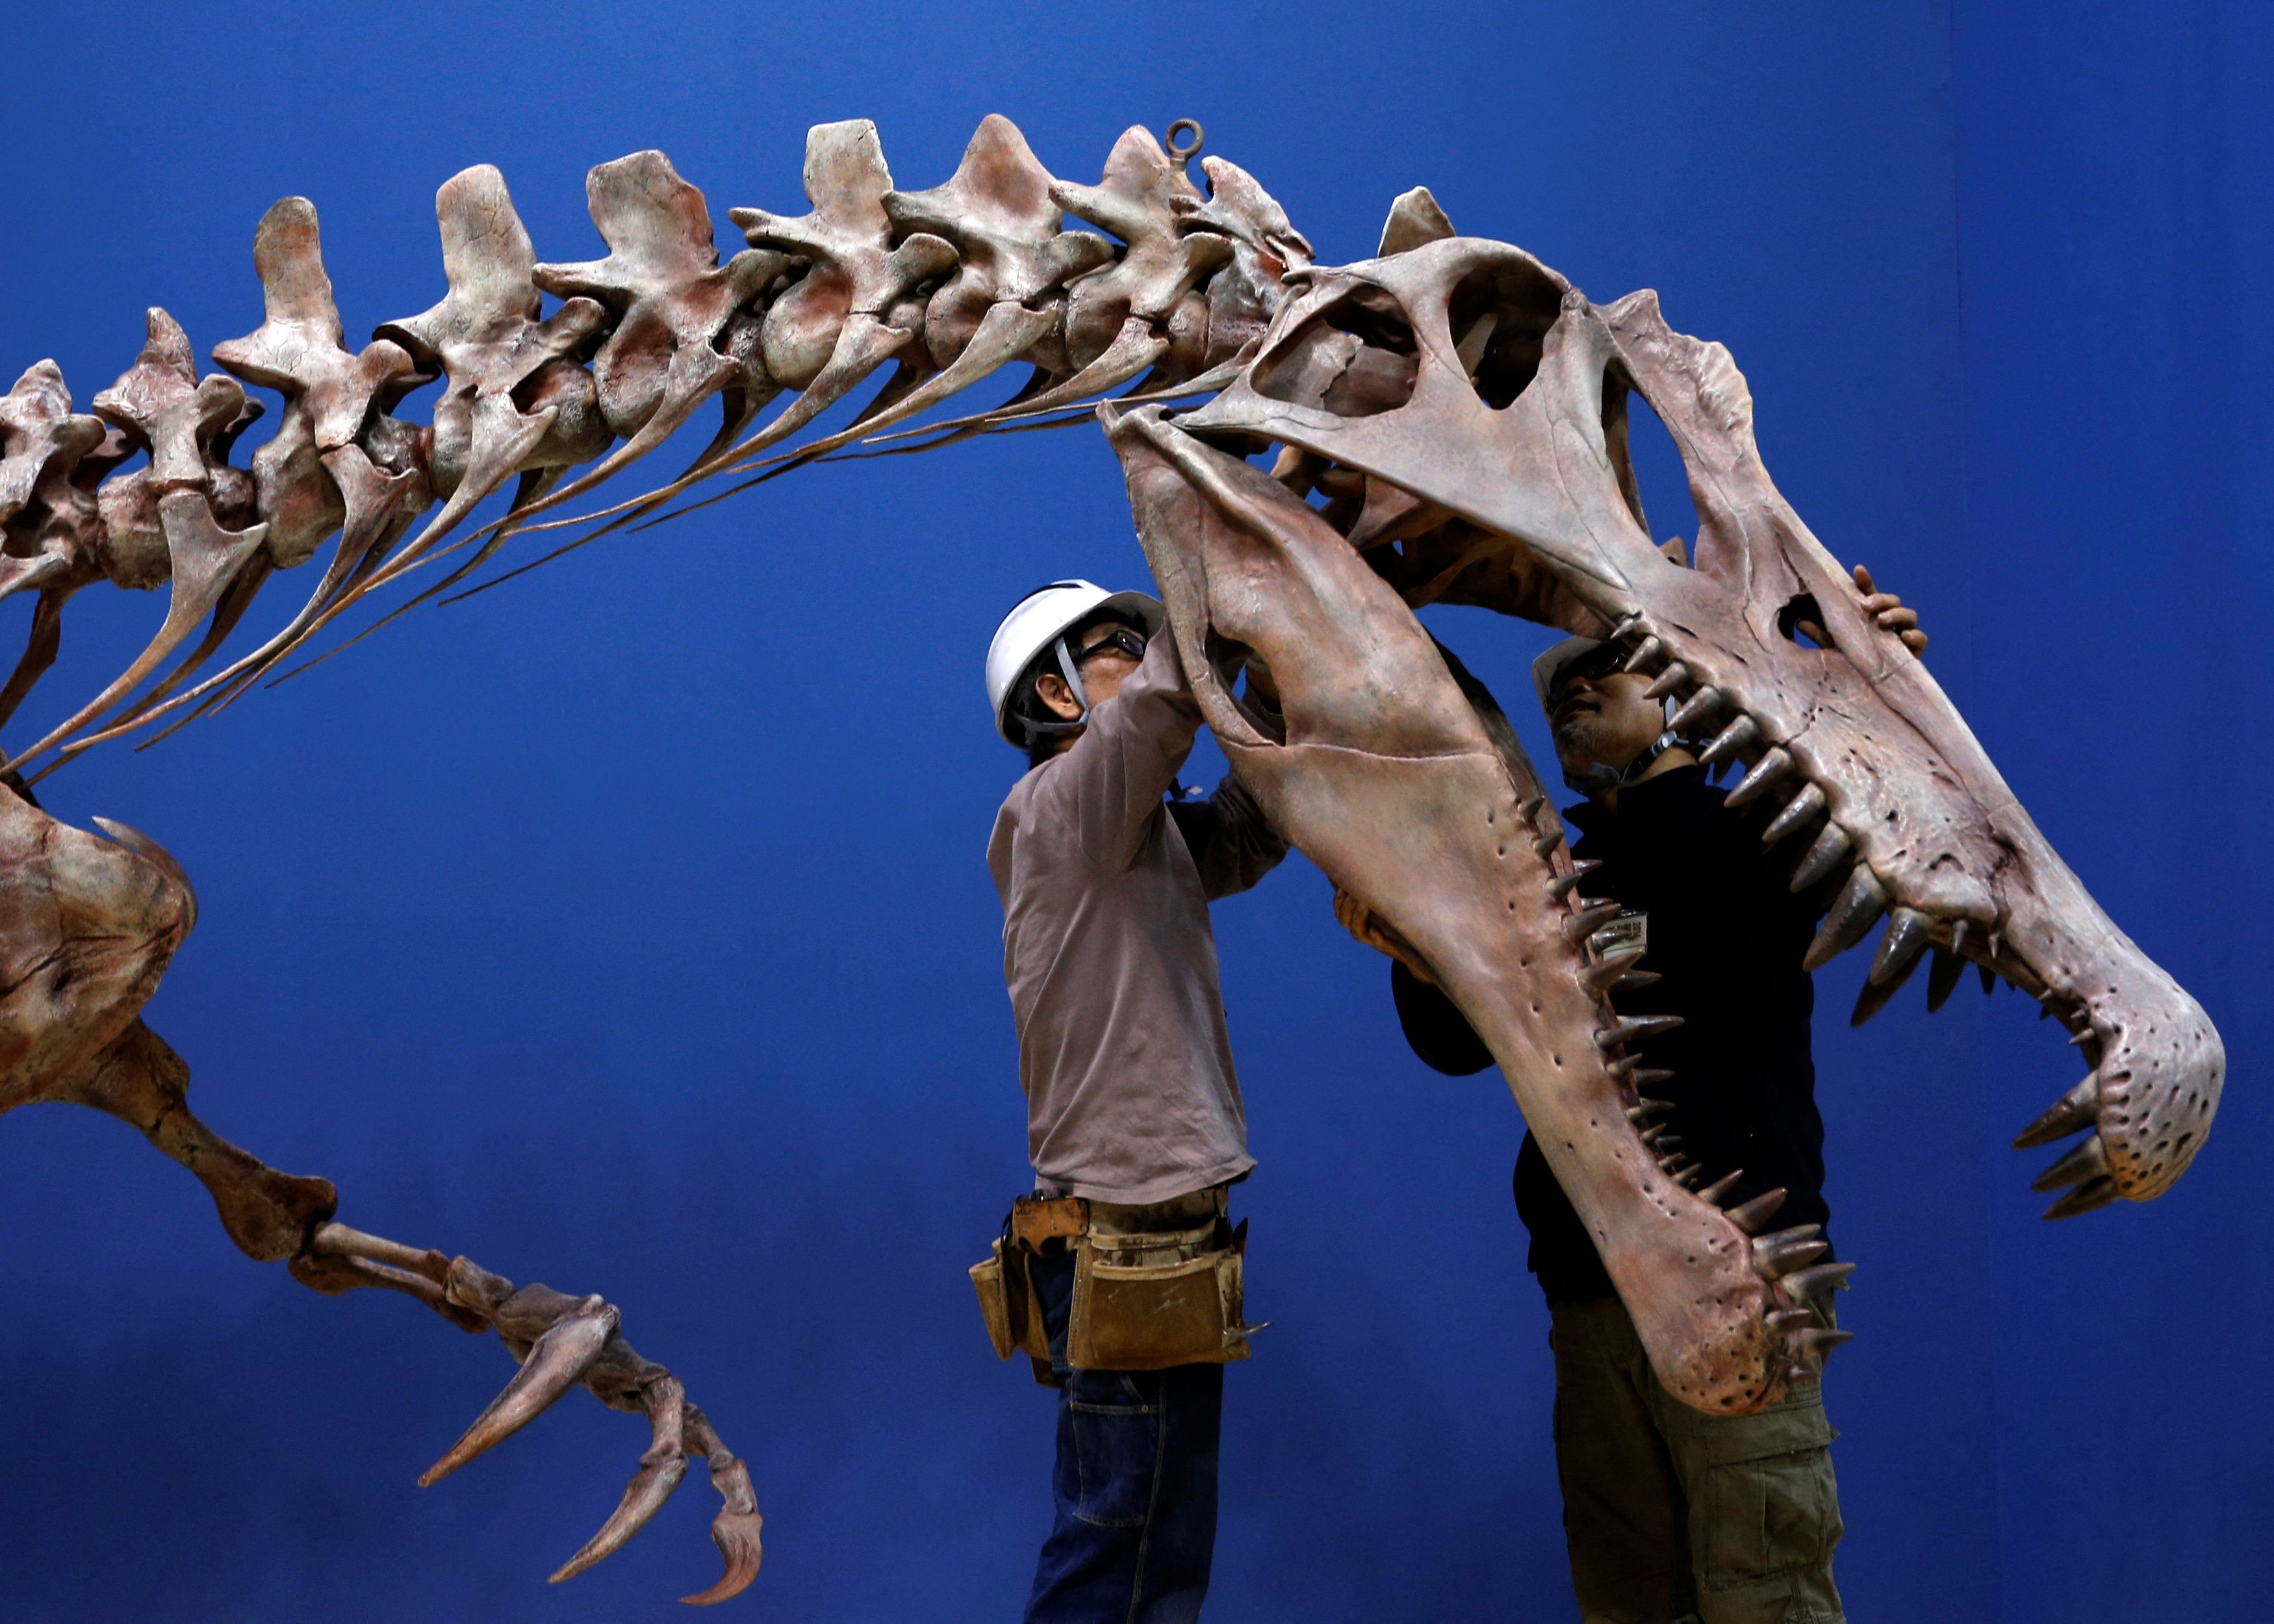 Workers adjust a Spinosaurus's skeleton replica during a preparation and media preview for the Dinosaur EXPO at the National Museum of Nature and Science in Tokyo